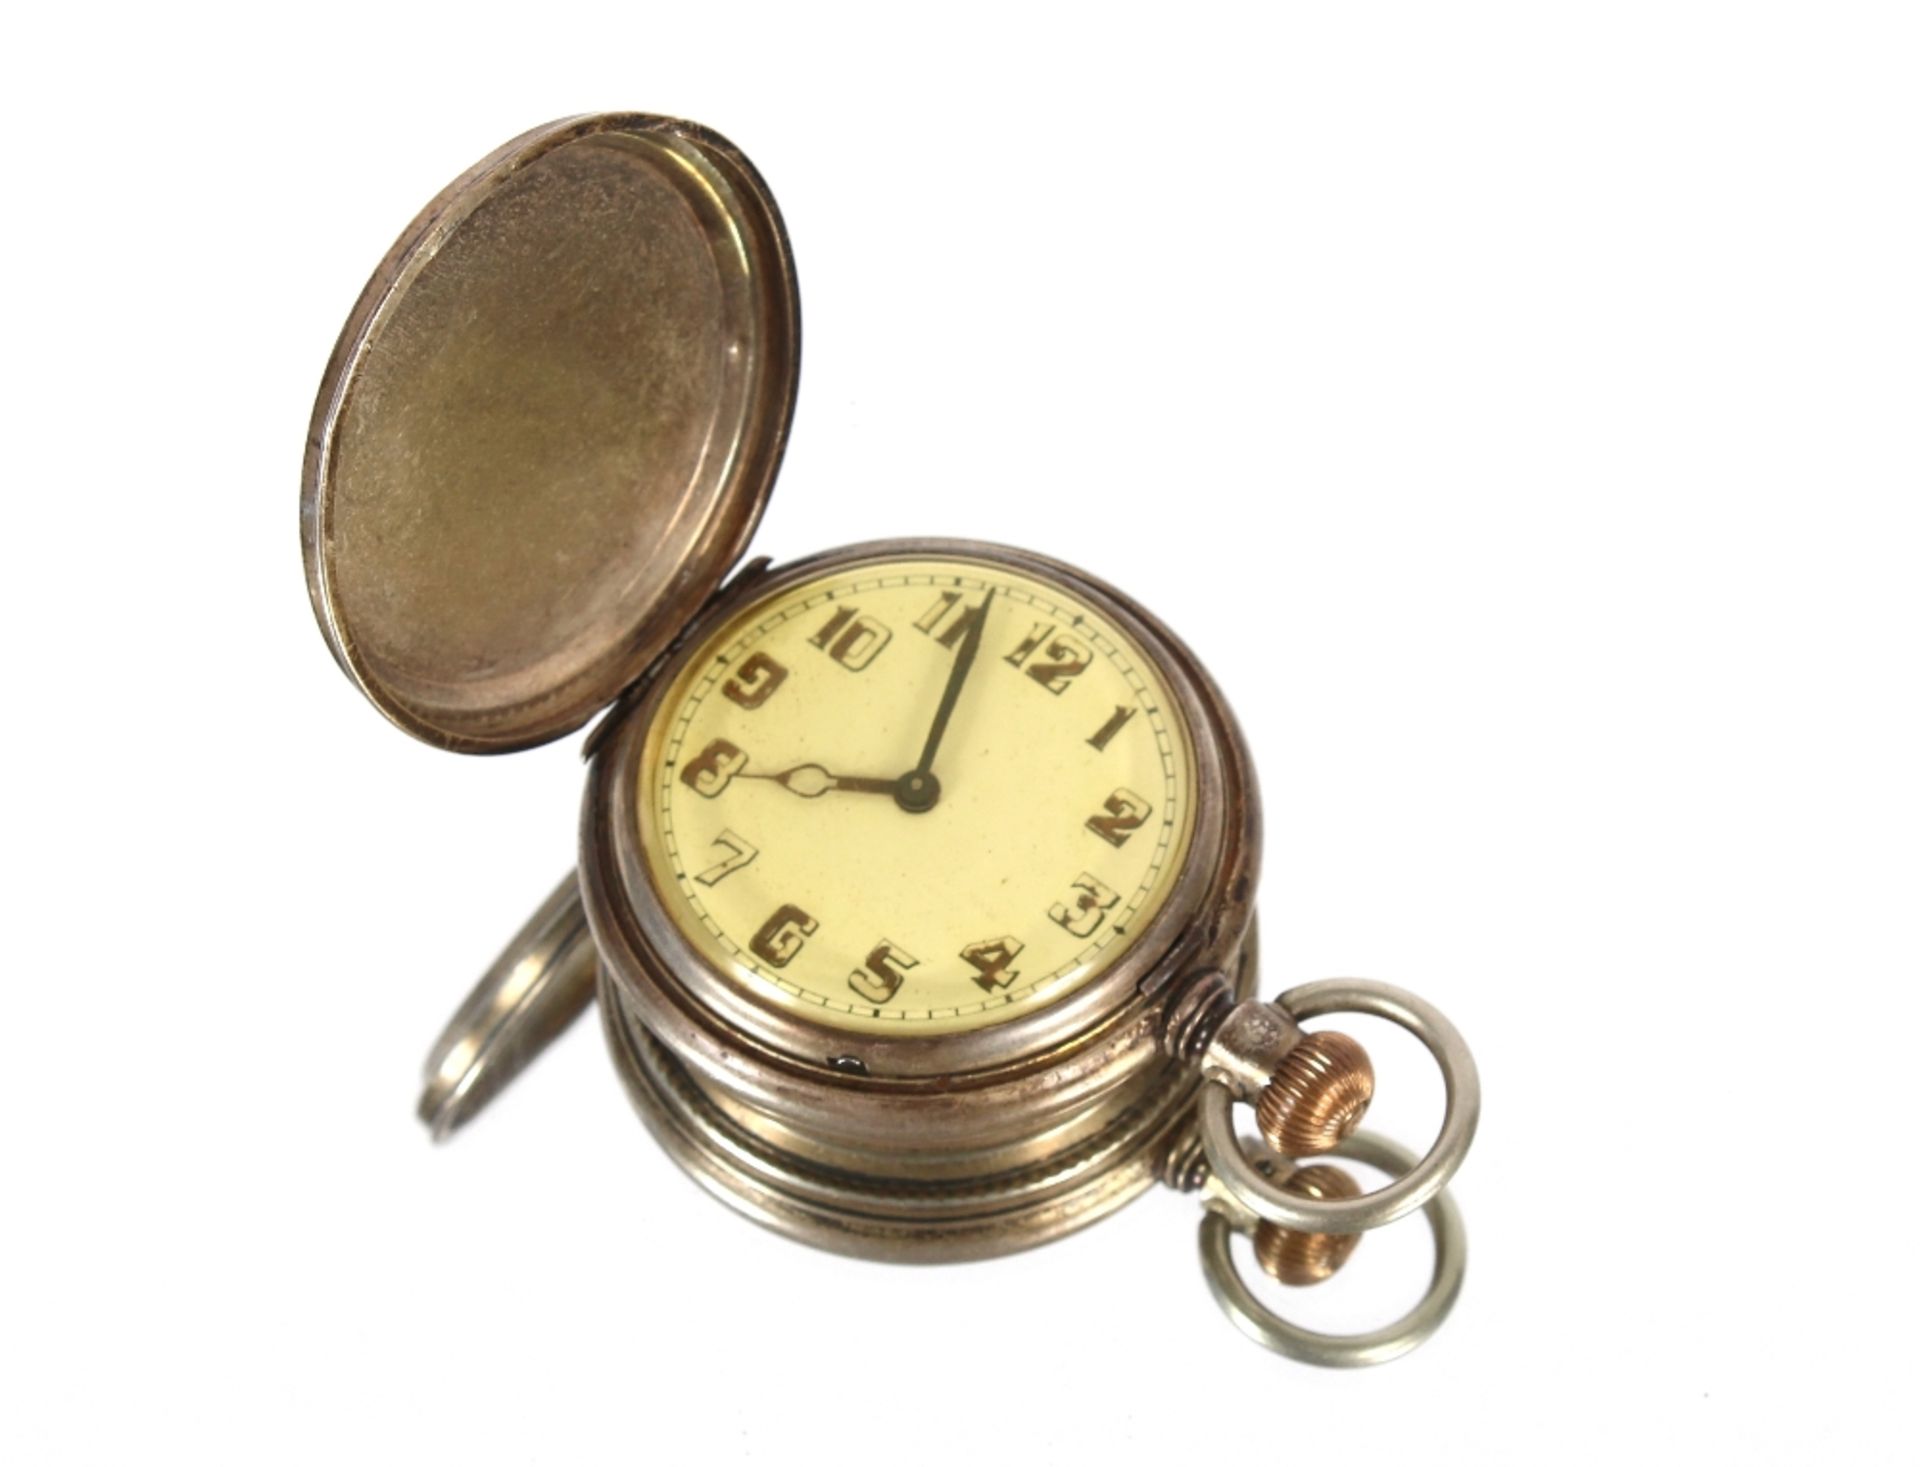 An American Standard Watch Co. of New York silver top wound pocket watch